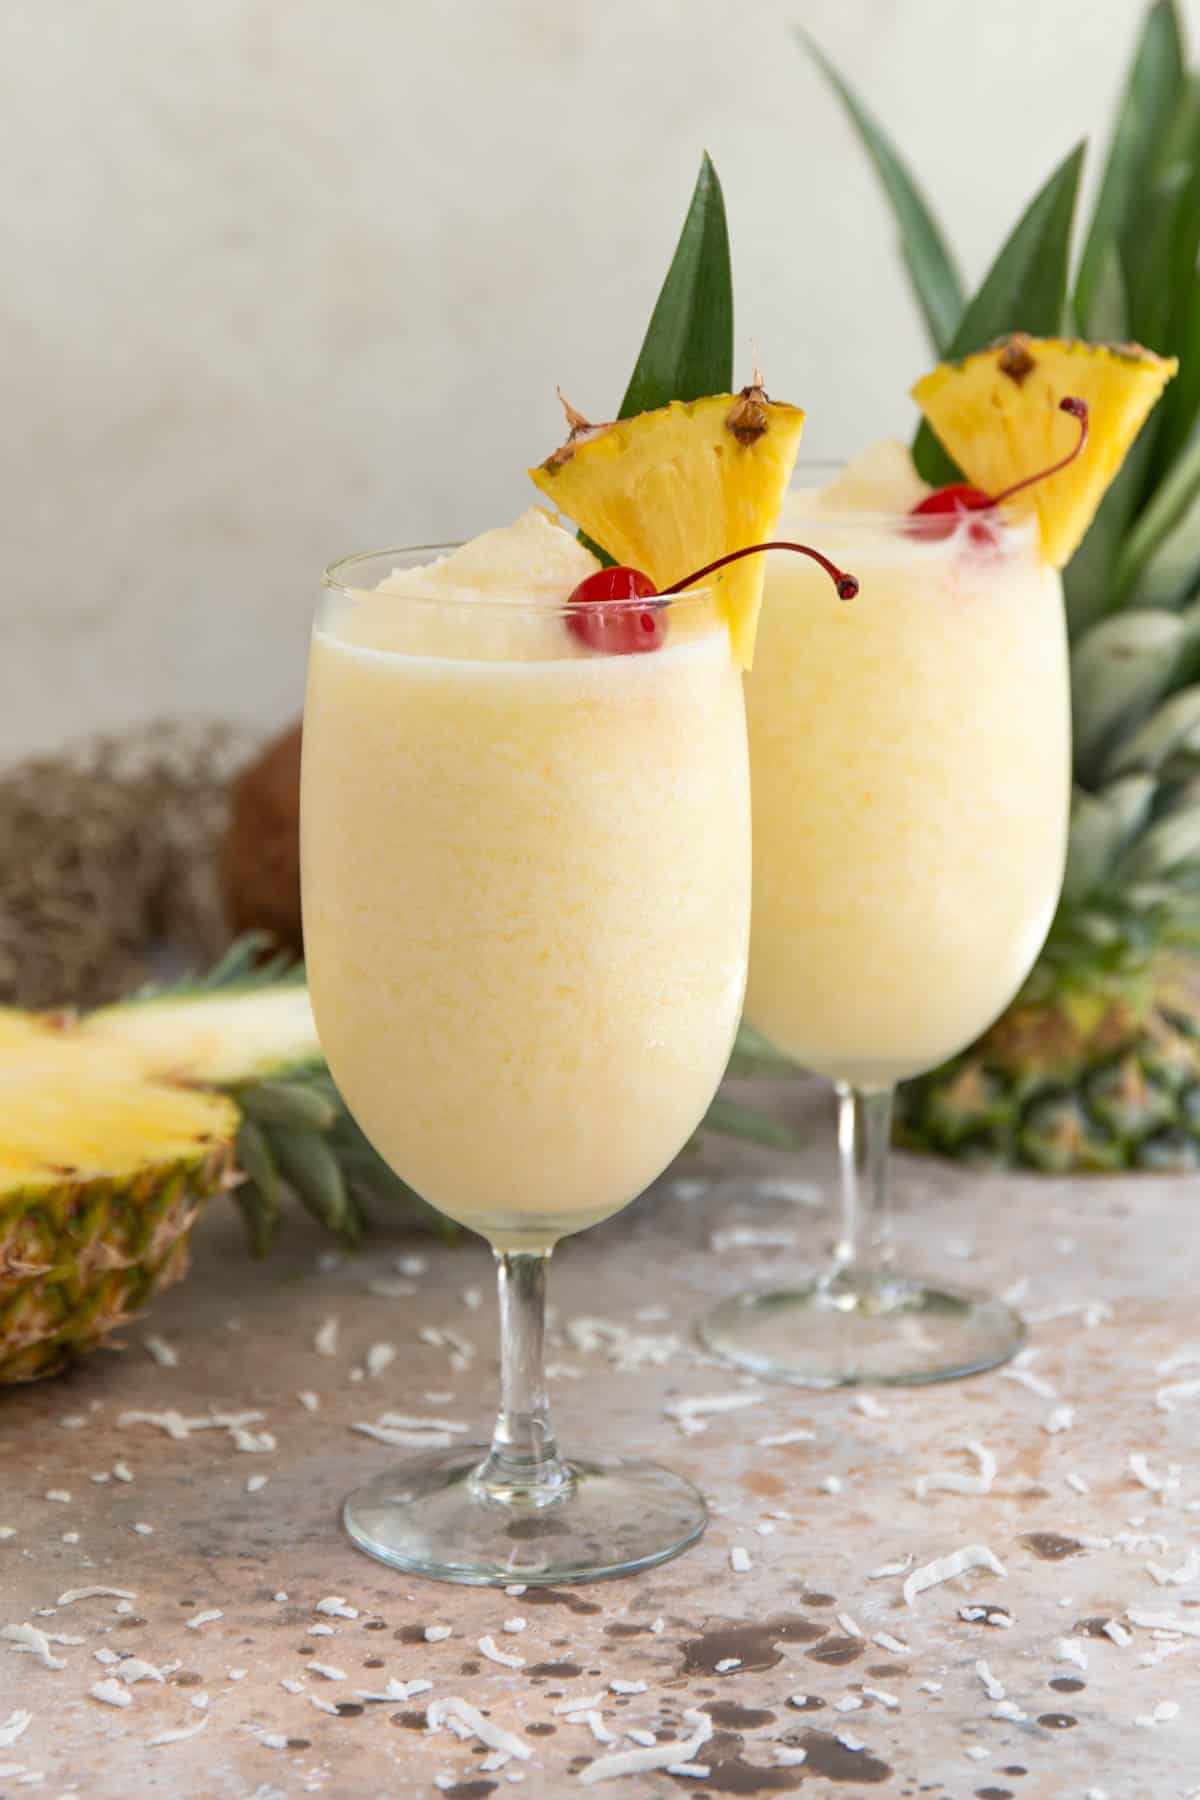 Front view of two frozen pina coladas garnished with a pineapple wedge and a maraschino cherry.